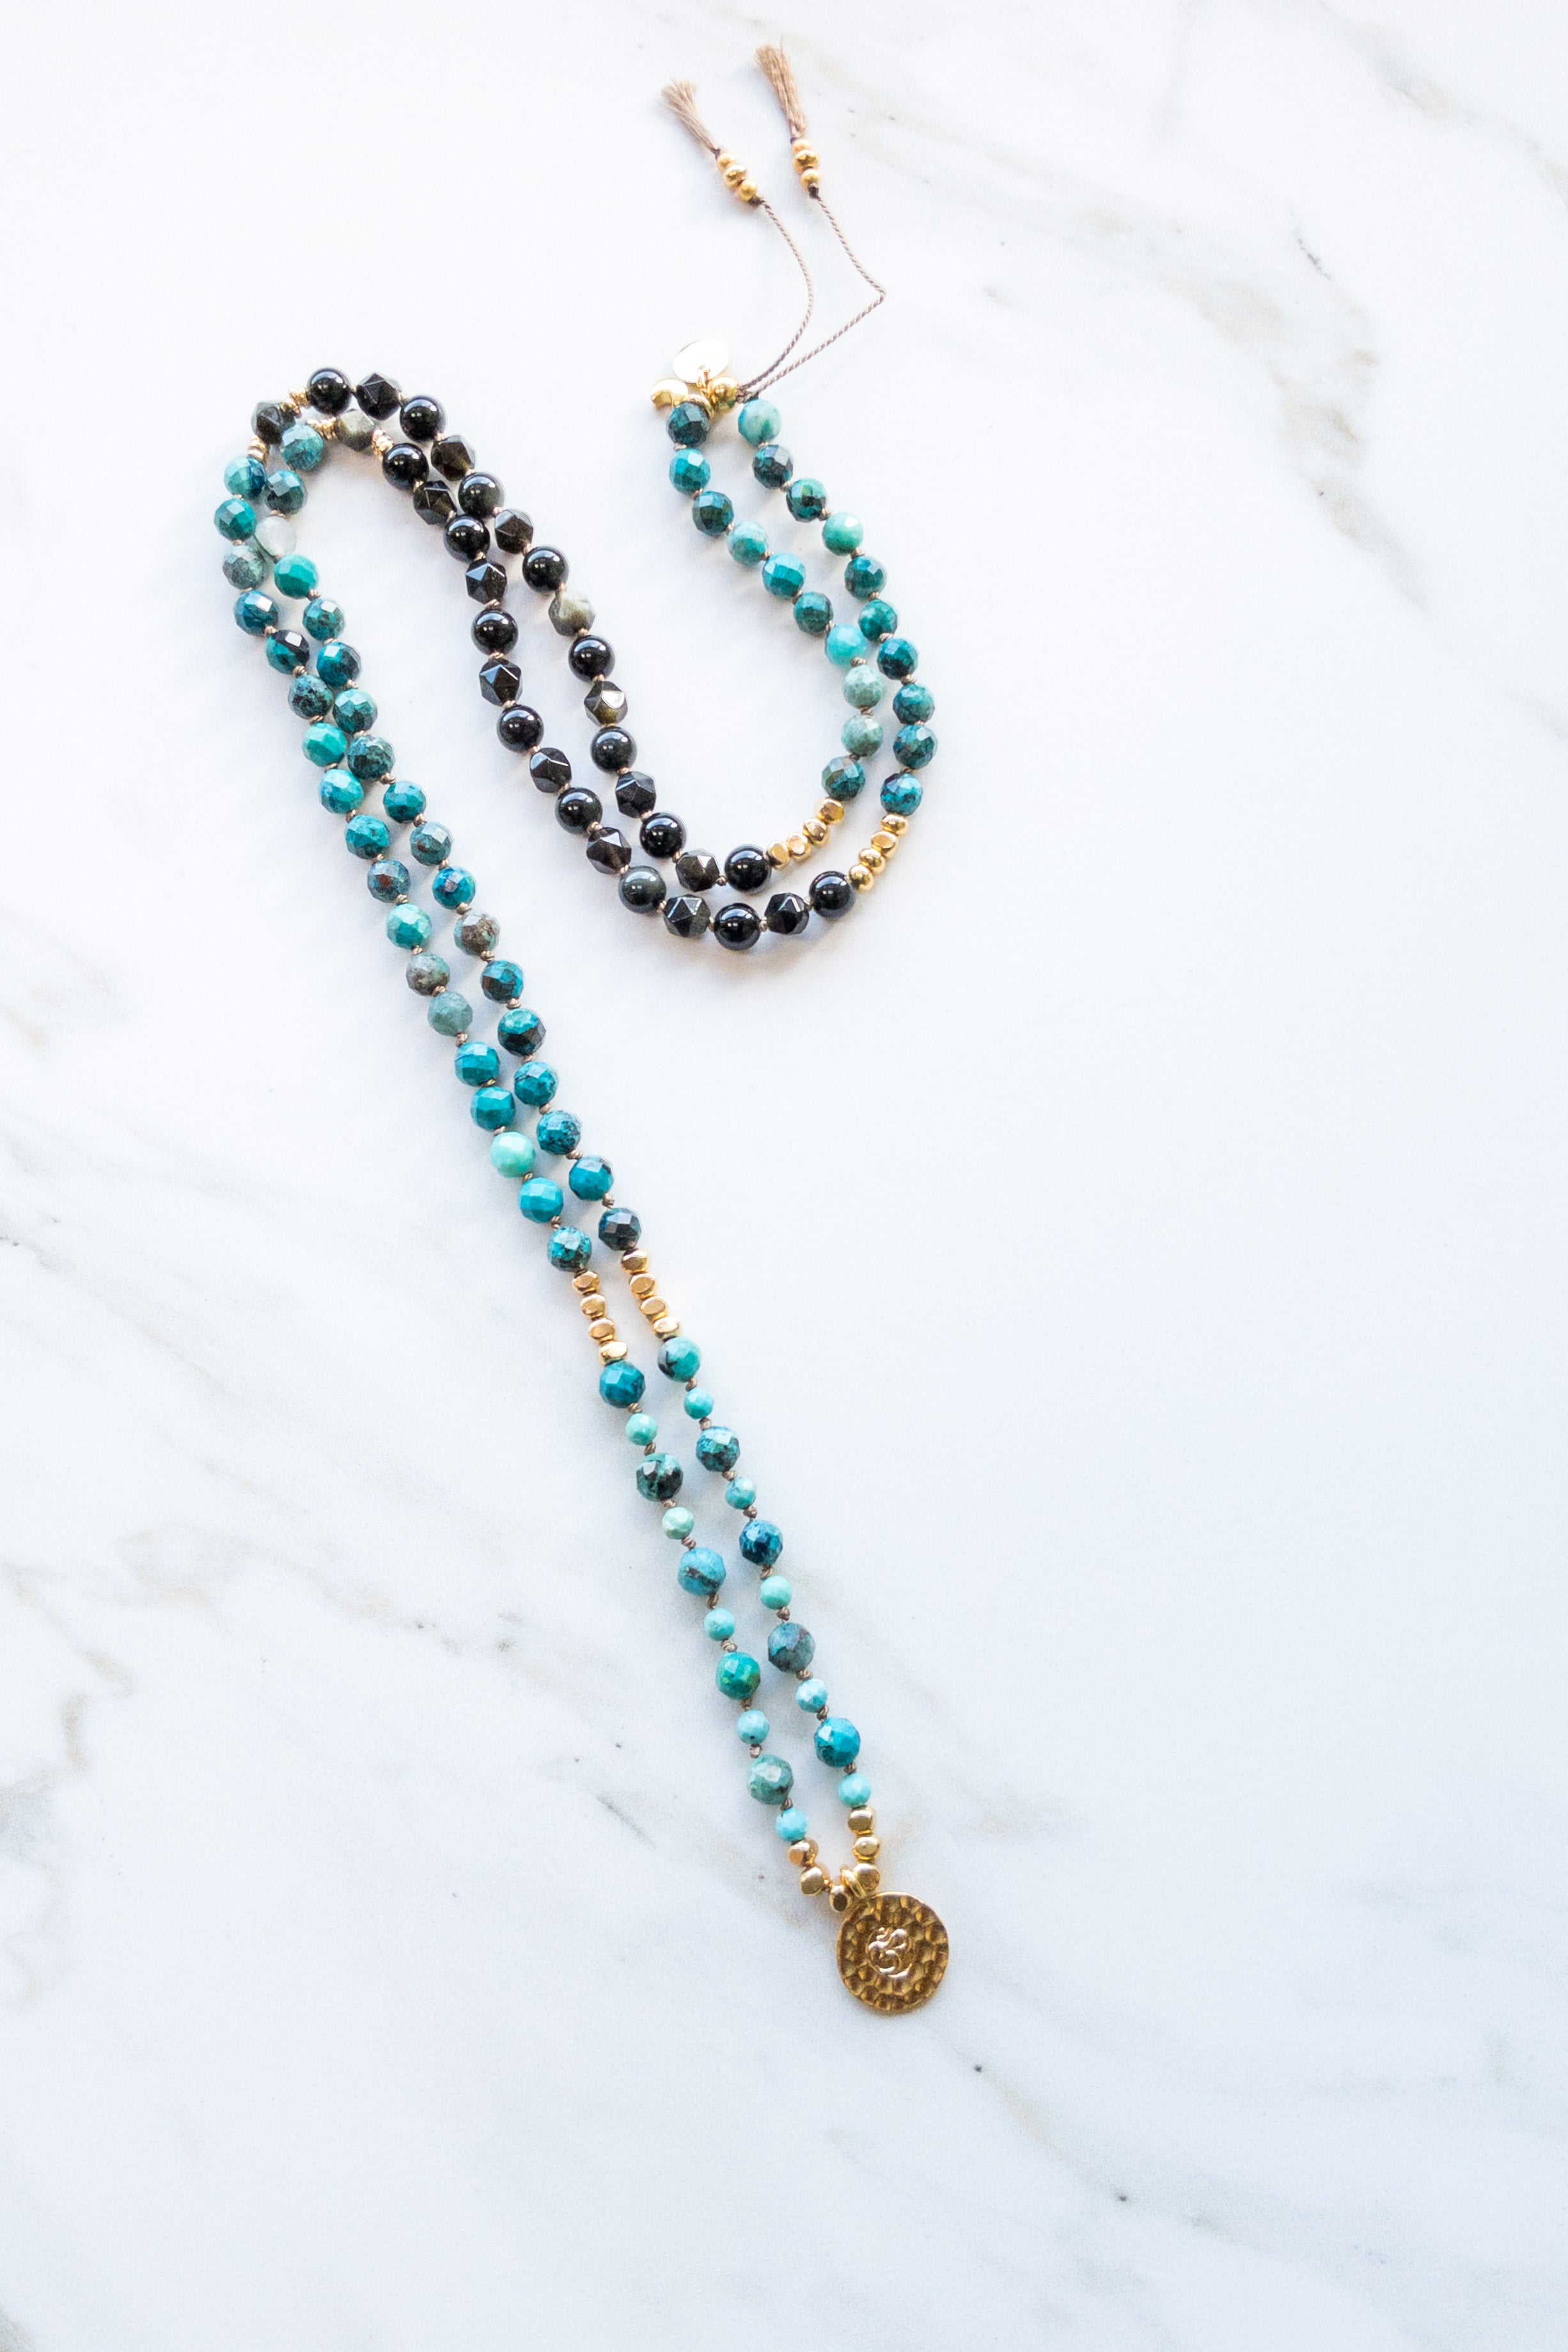 Sacred Path Mala Necklace - OM - indradhanush collection - yoga necklace 